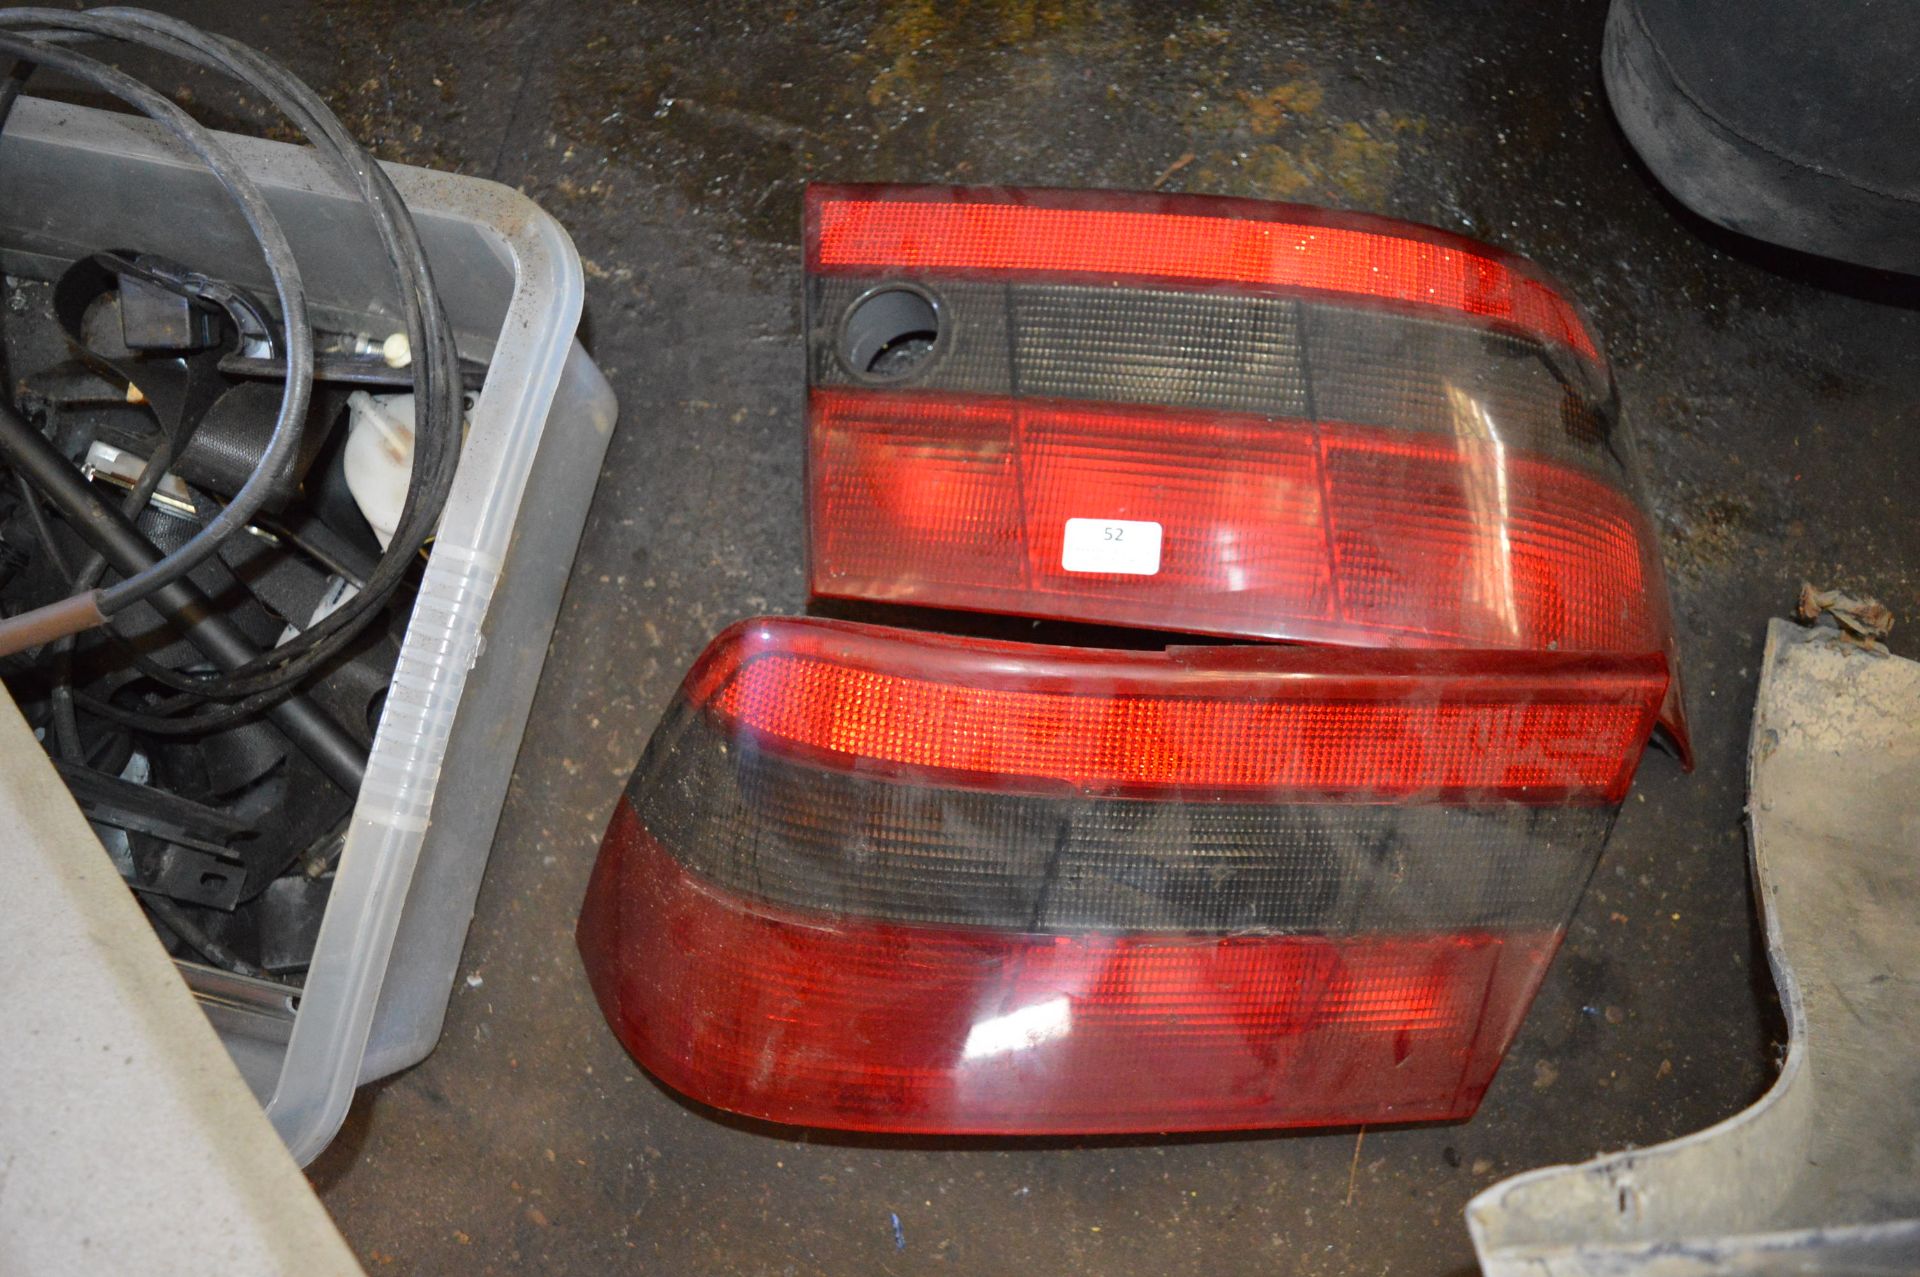 Pair of Vauxhall Calibra Rear Lights (nearside has a small crack)